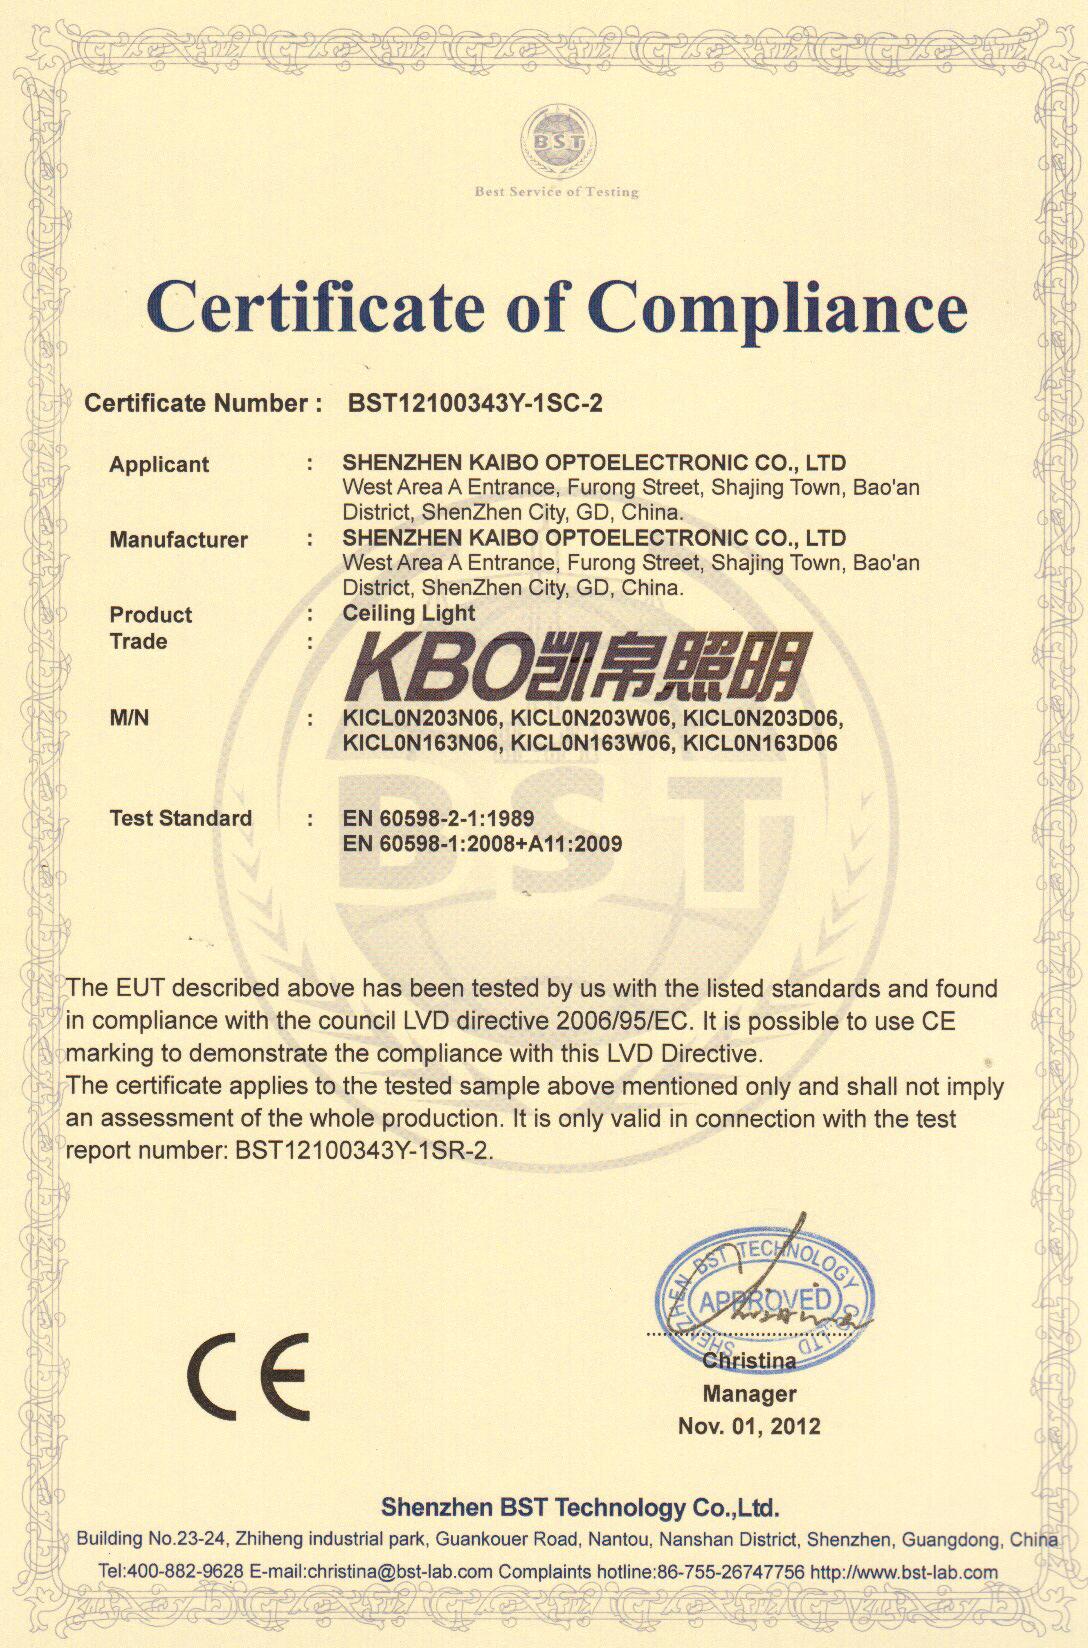 BST Certification & Testing (SZ) Limited